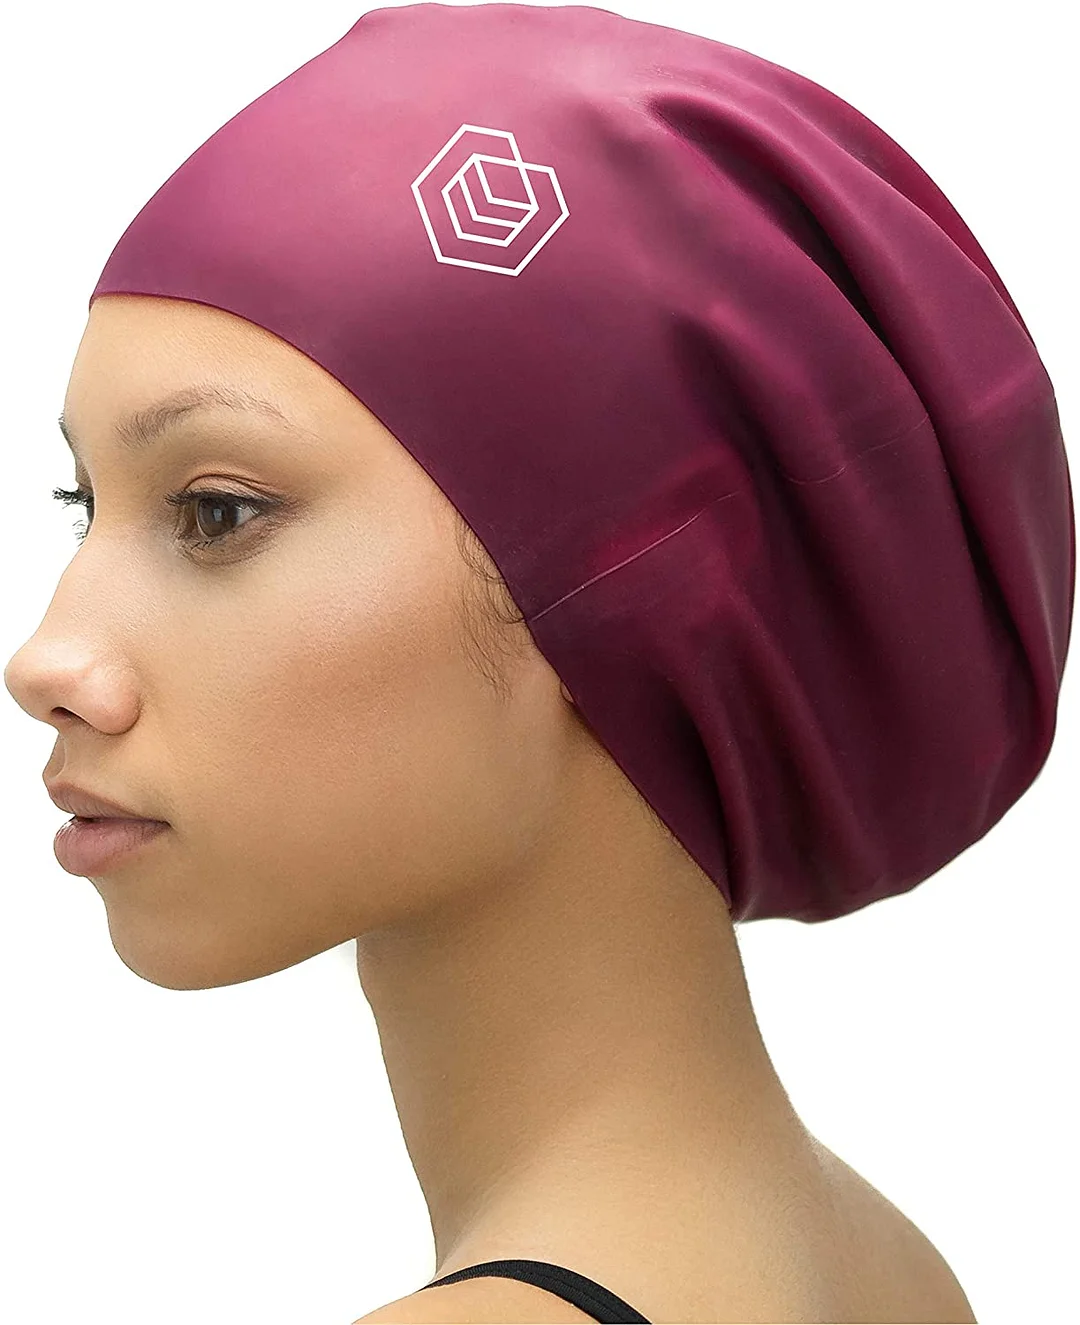 Extra Large Swimming Cap - Designed for Long Hair, Dreadlocks, Weaves, Hair Extensions, Braids, Curls & Afros